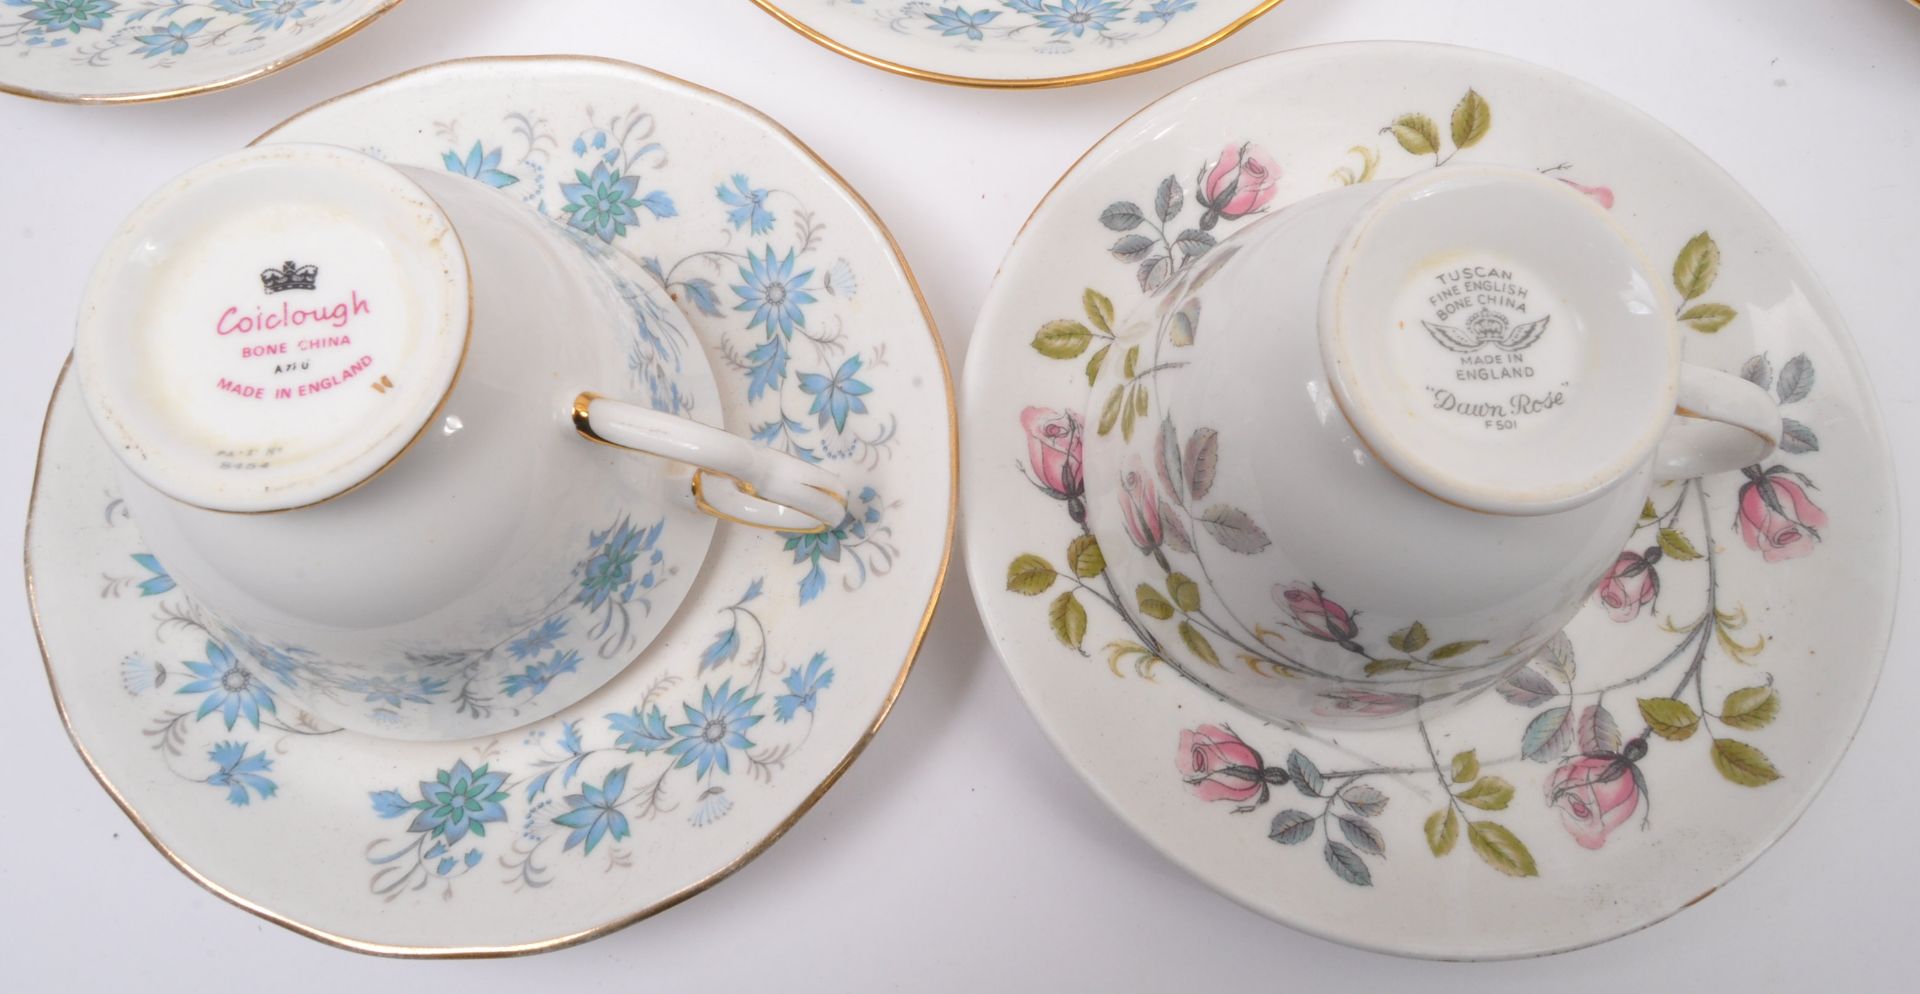 TWO VINTAGE BONE CHINA TEA SERVICES - TUSCAN & COLCLOUGH - Image 5 of 6